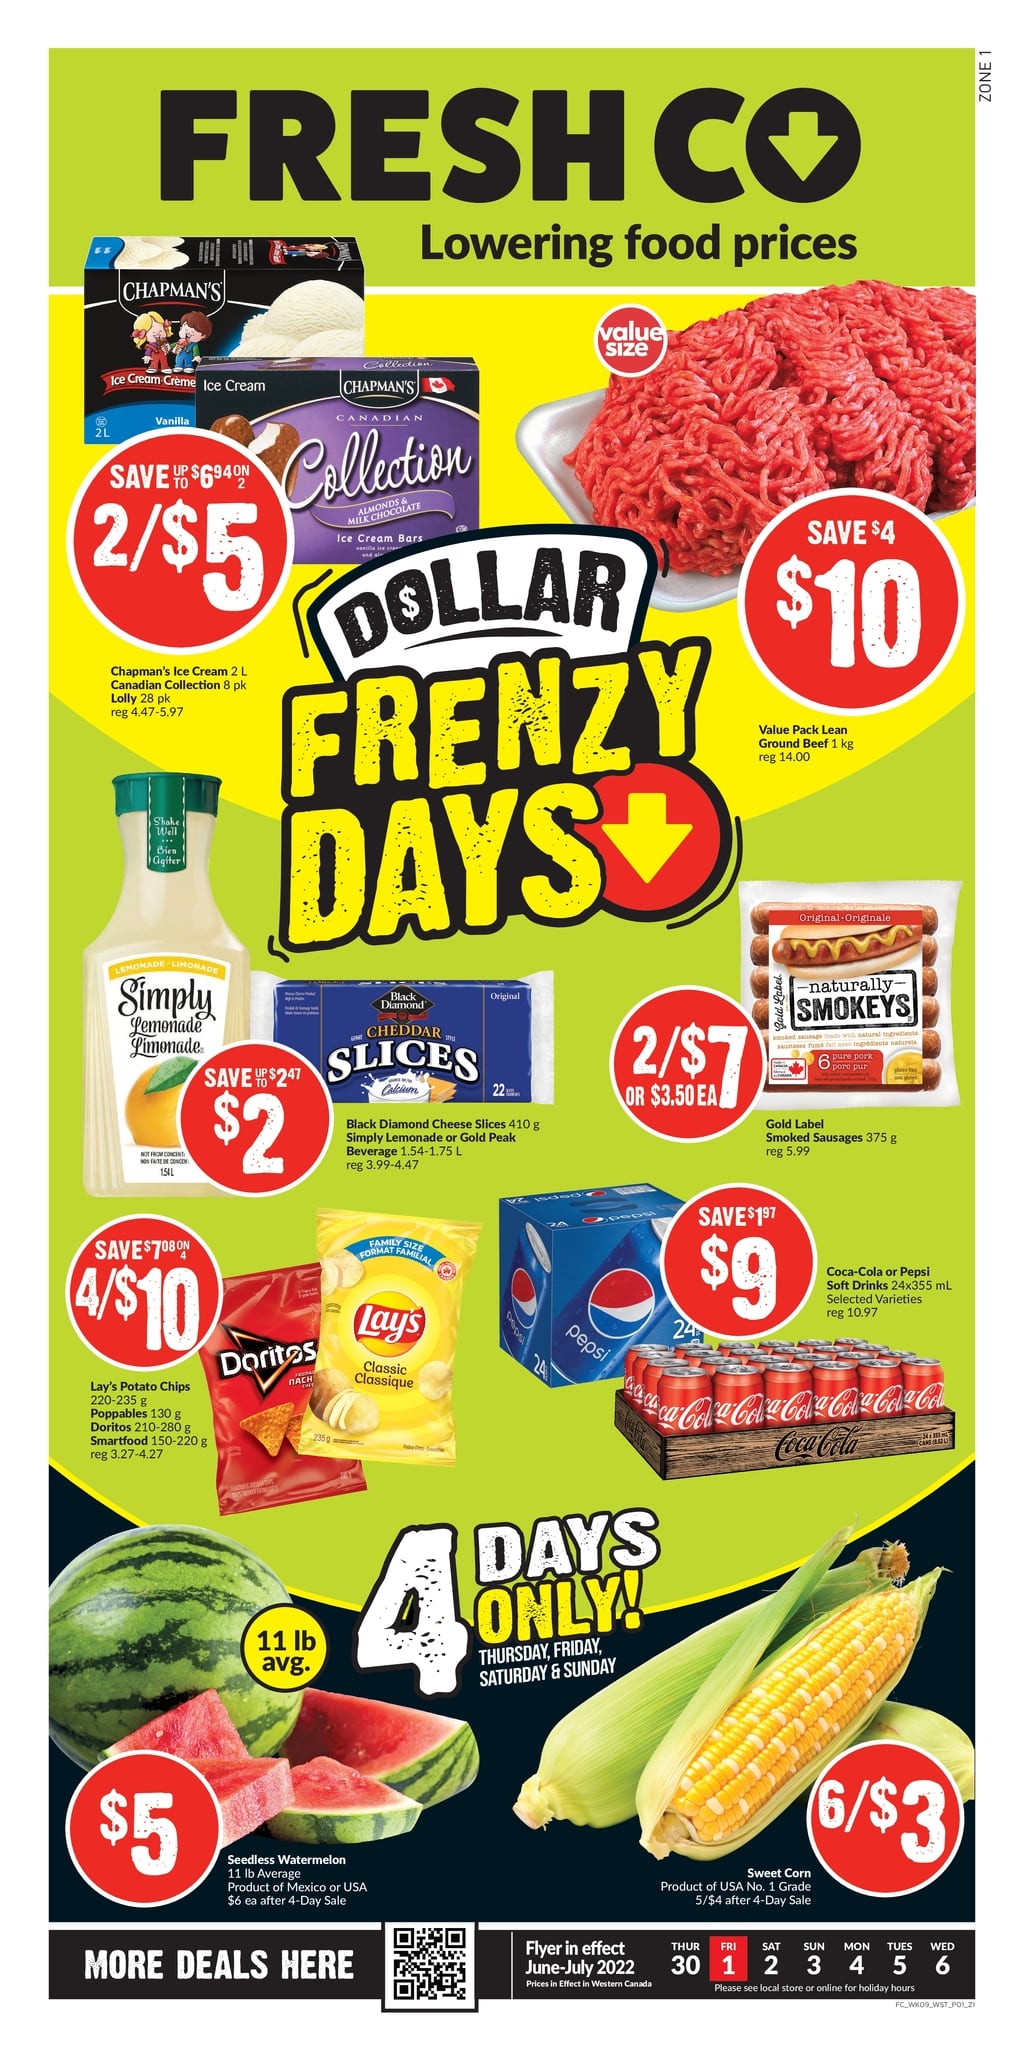 FreshCo British Columbia - Weekly Flyer Specials - Page 1